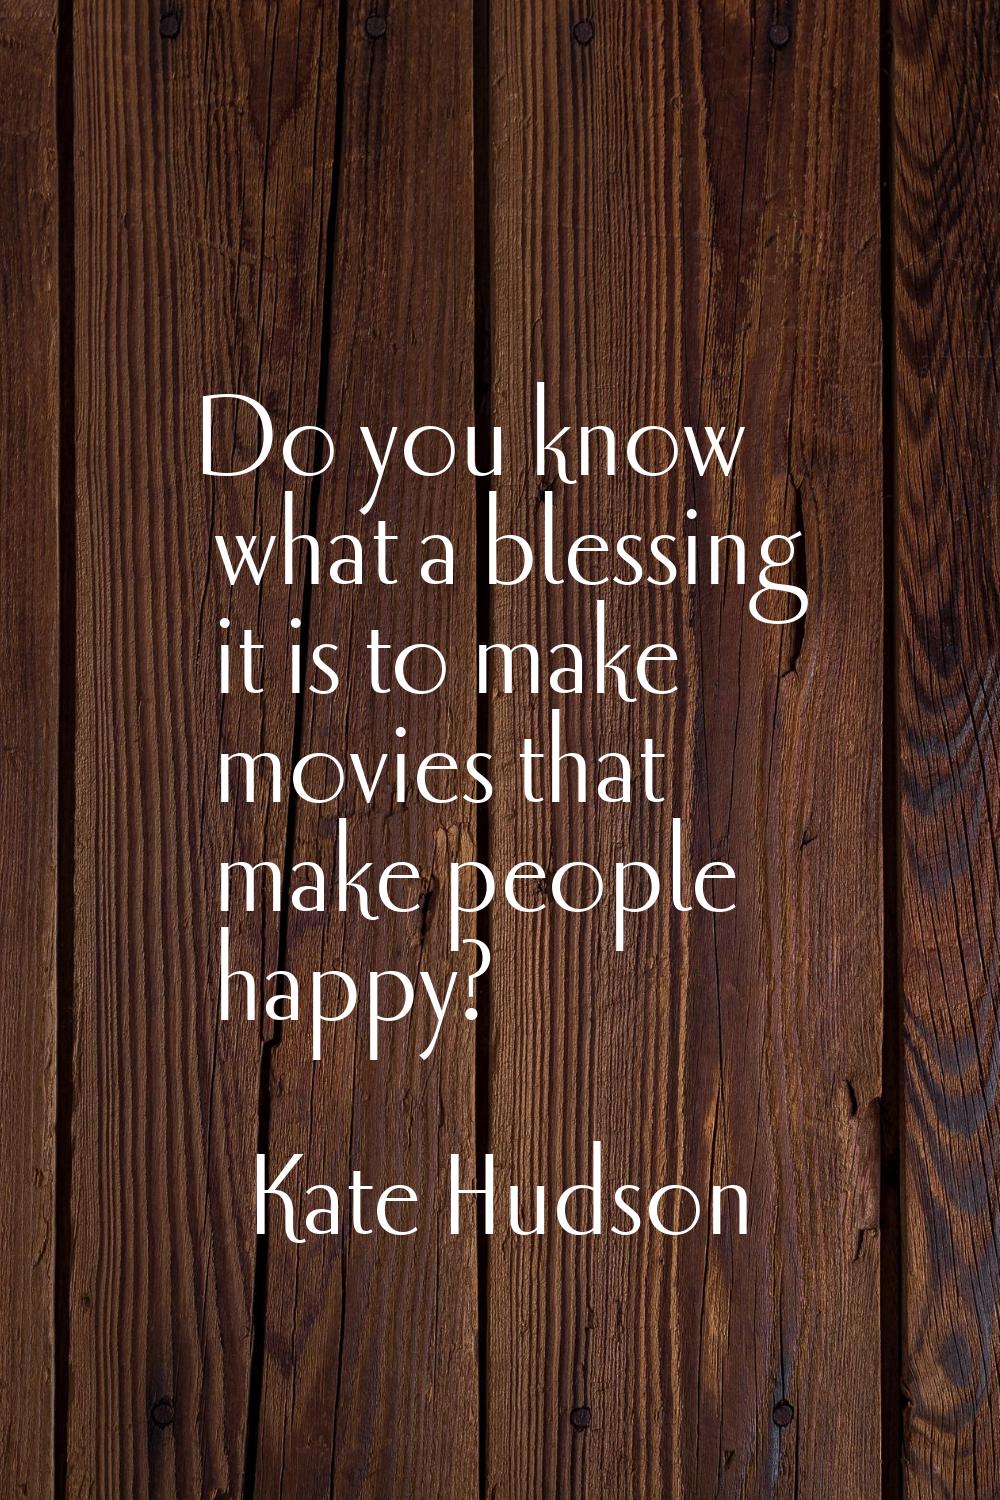 Do you know what a blessing it is to make movies that make people happy?